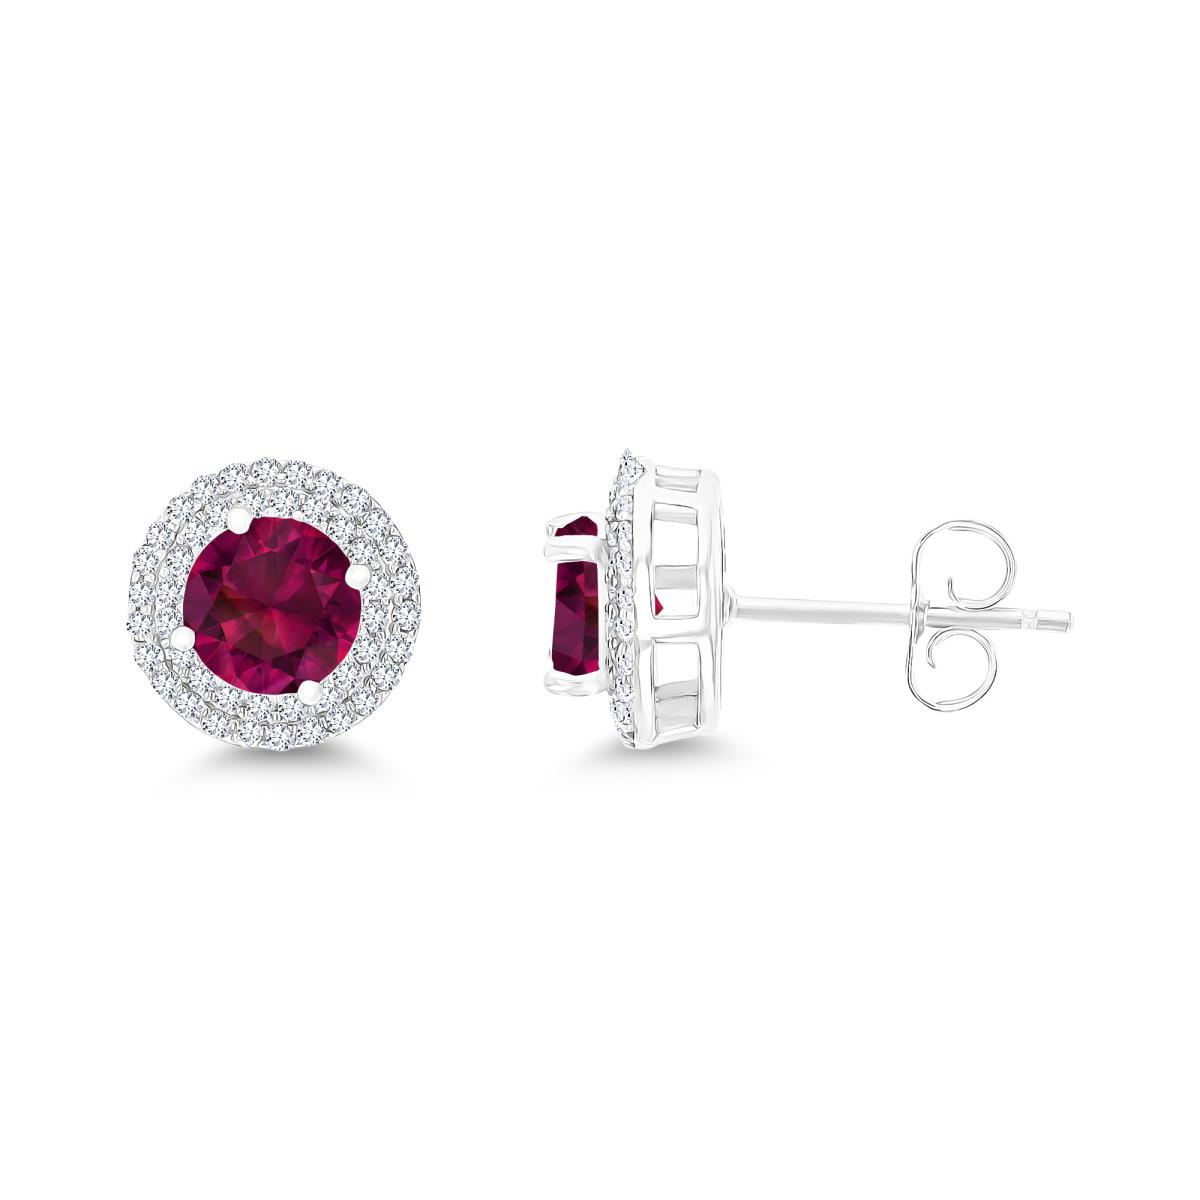 Sterling Silver Rhodium 6mm RD Cr Ruby / Cr White Sapphire Double Halo Stud Earring